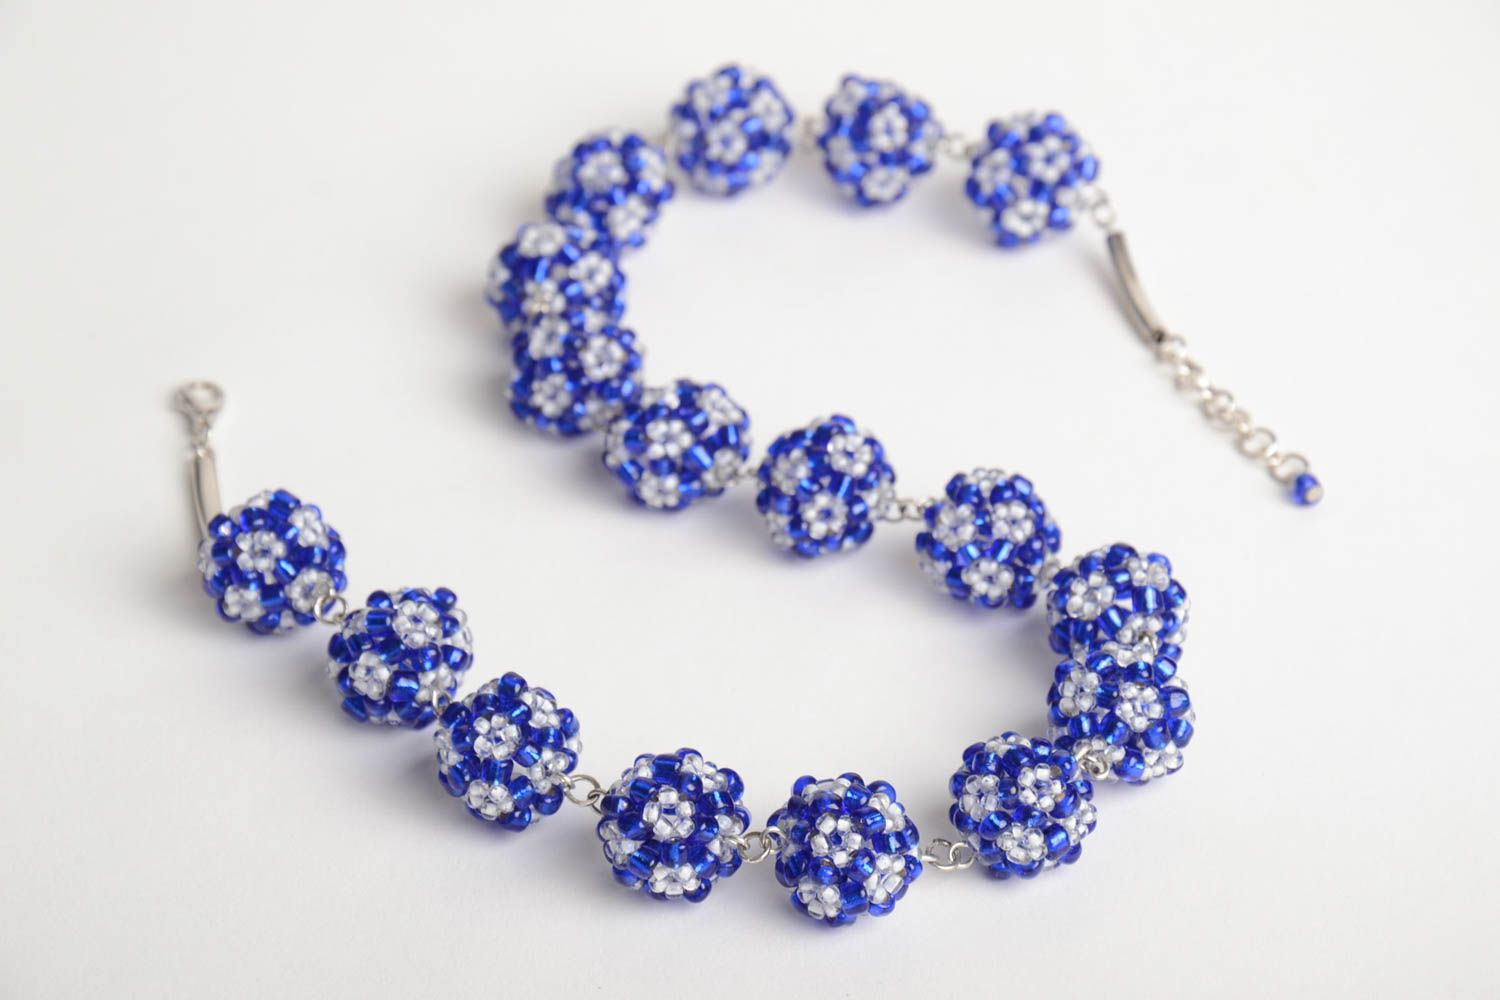 Handmade designer women's necklace with balls crocheted of blue and white beads photo 5